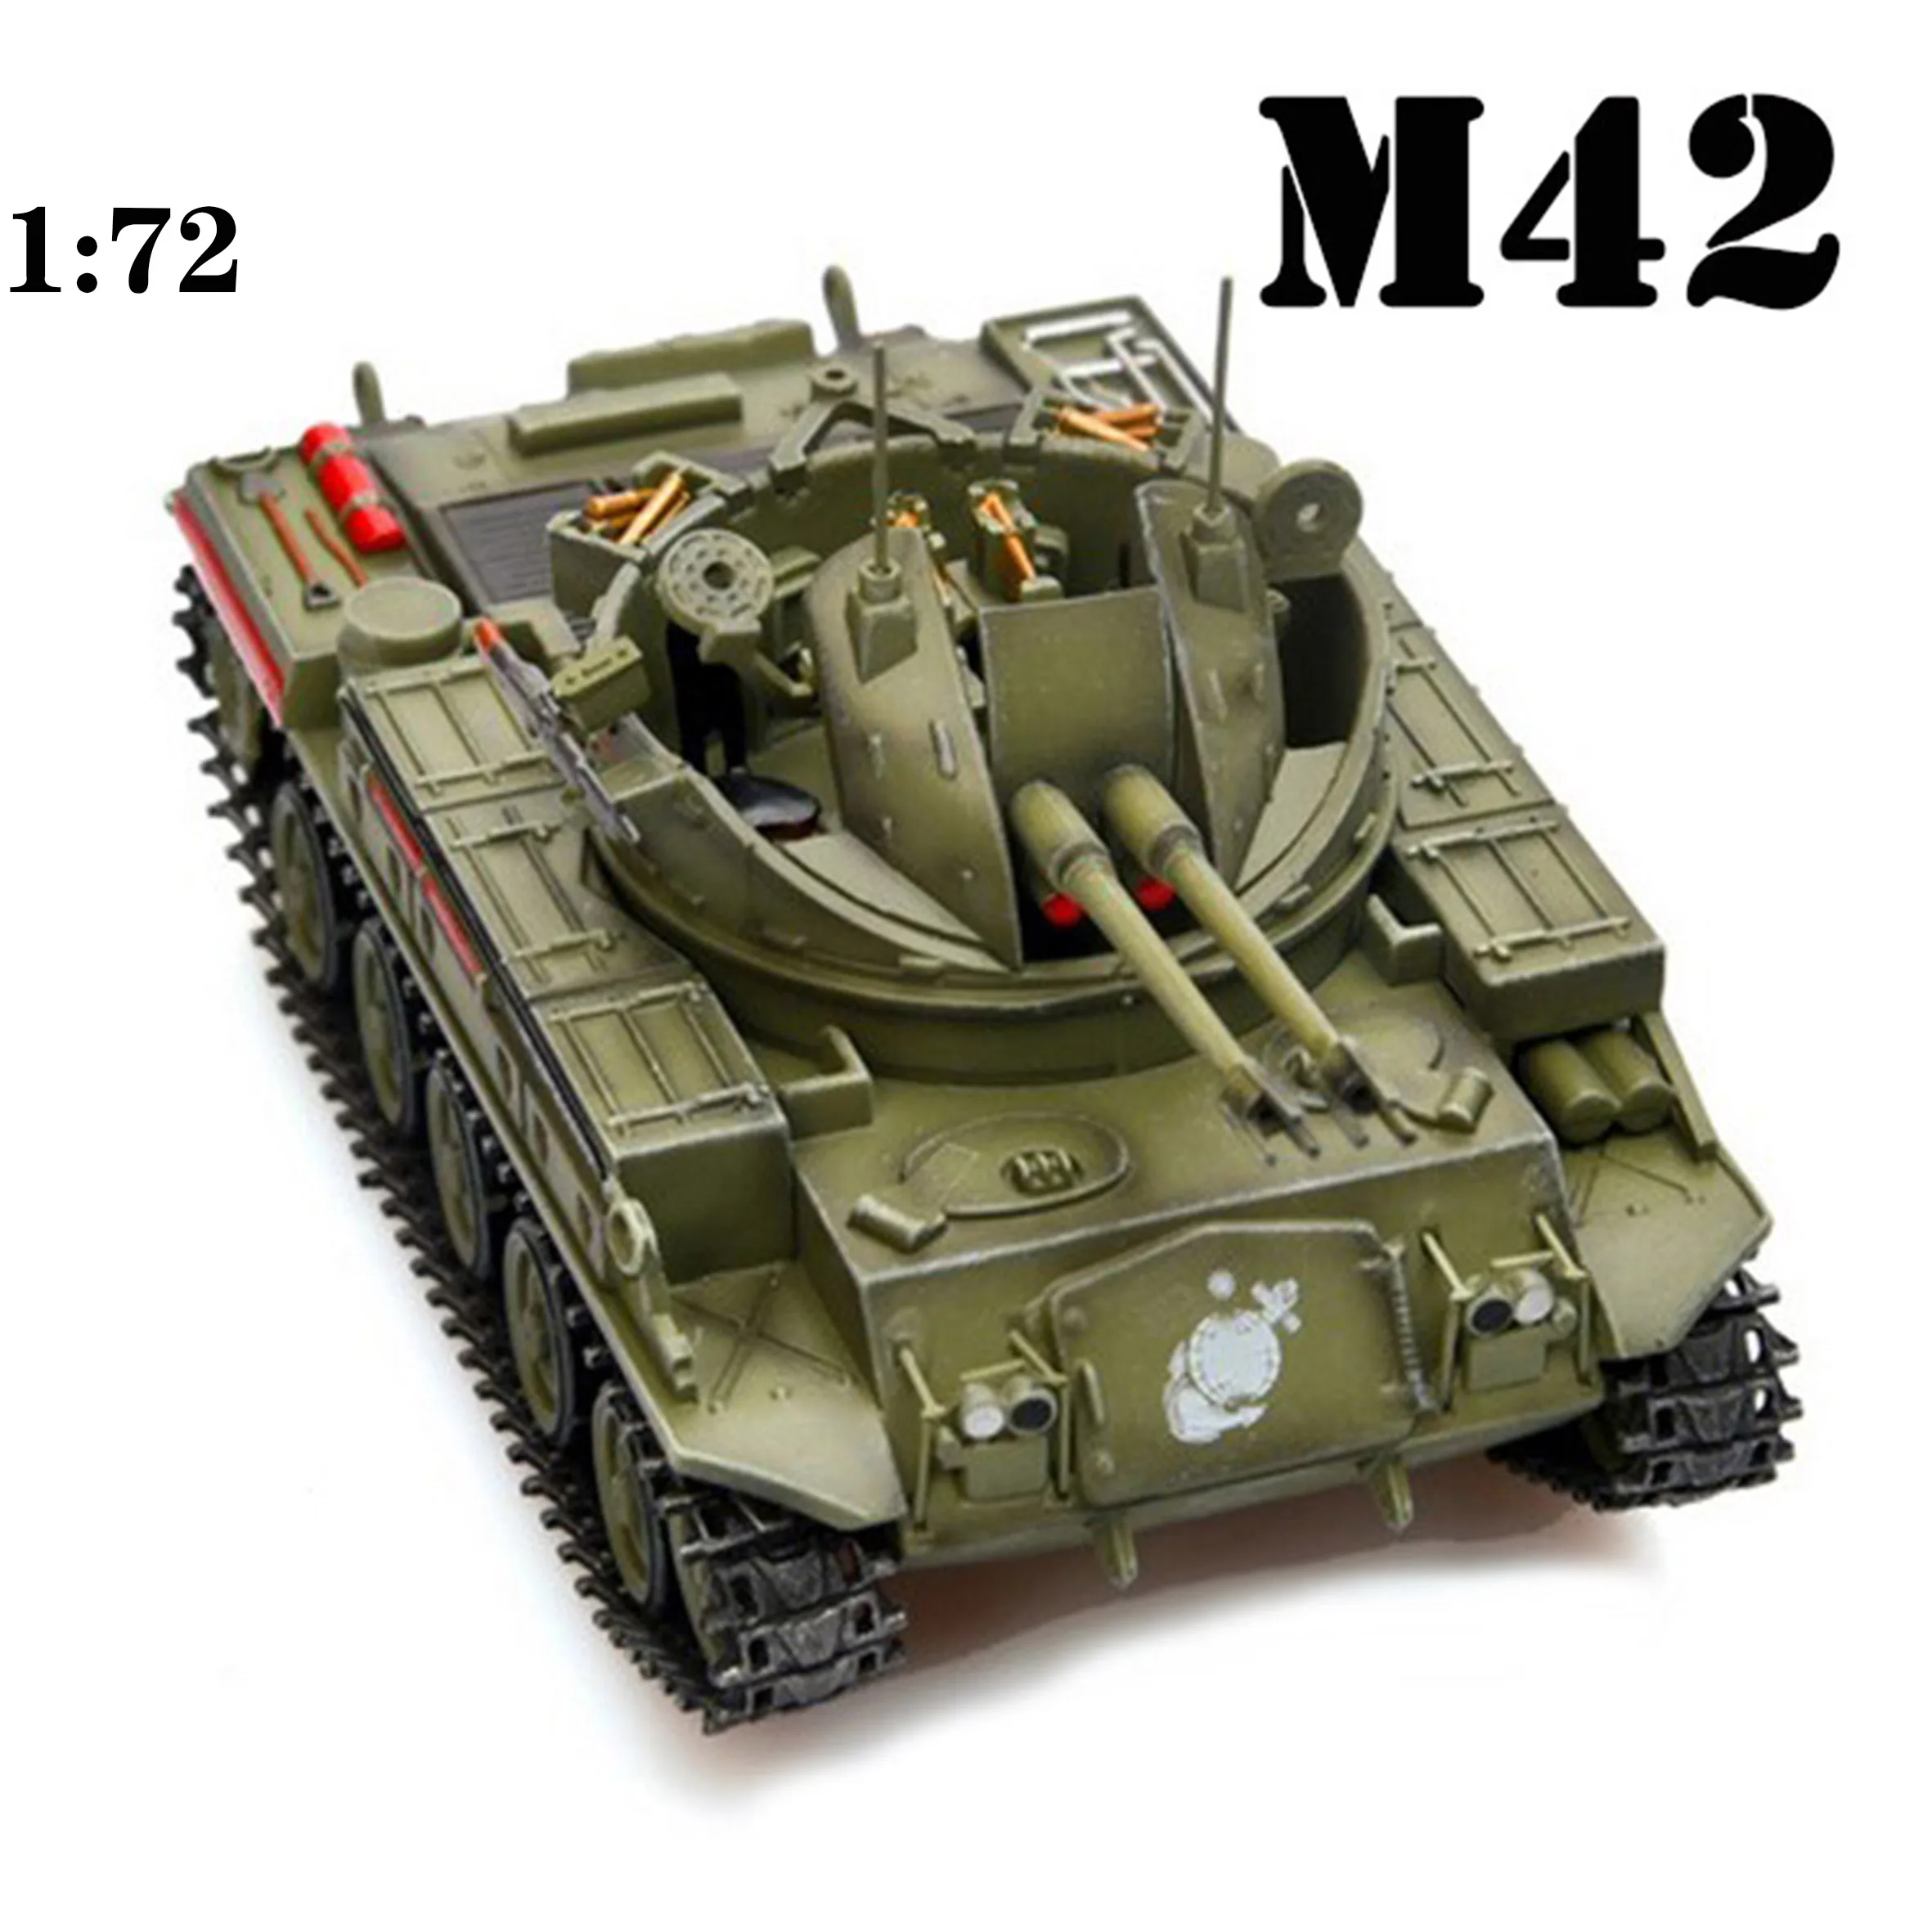 1-72-us-marine-corps-m42-double-barrel-self-propelled-gun-model-finished-product-collection-model